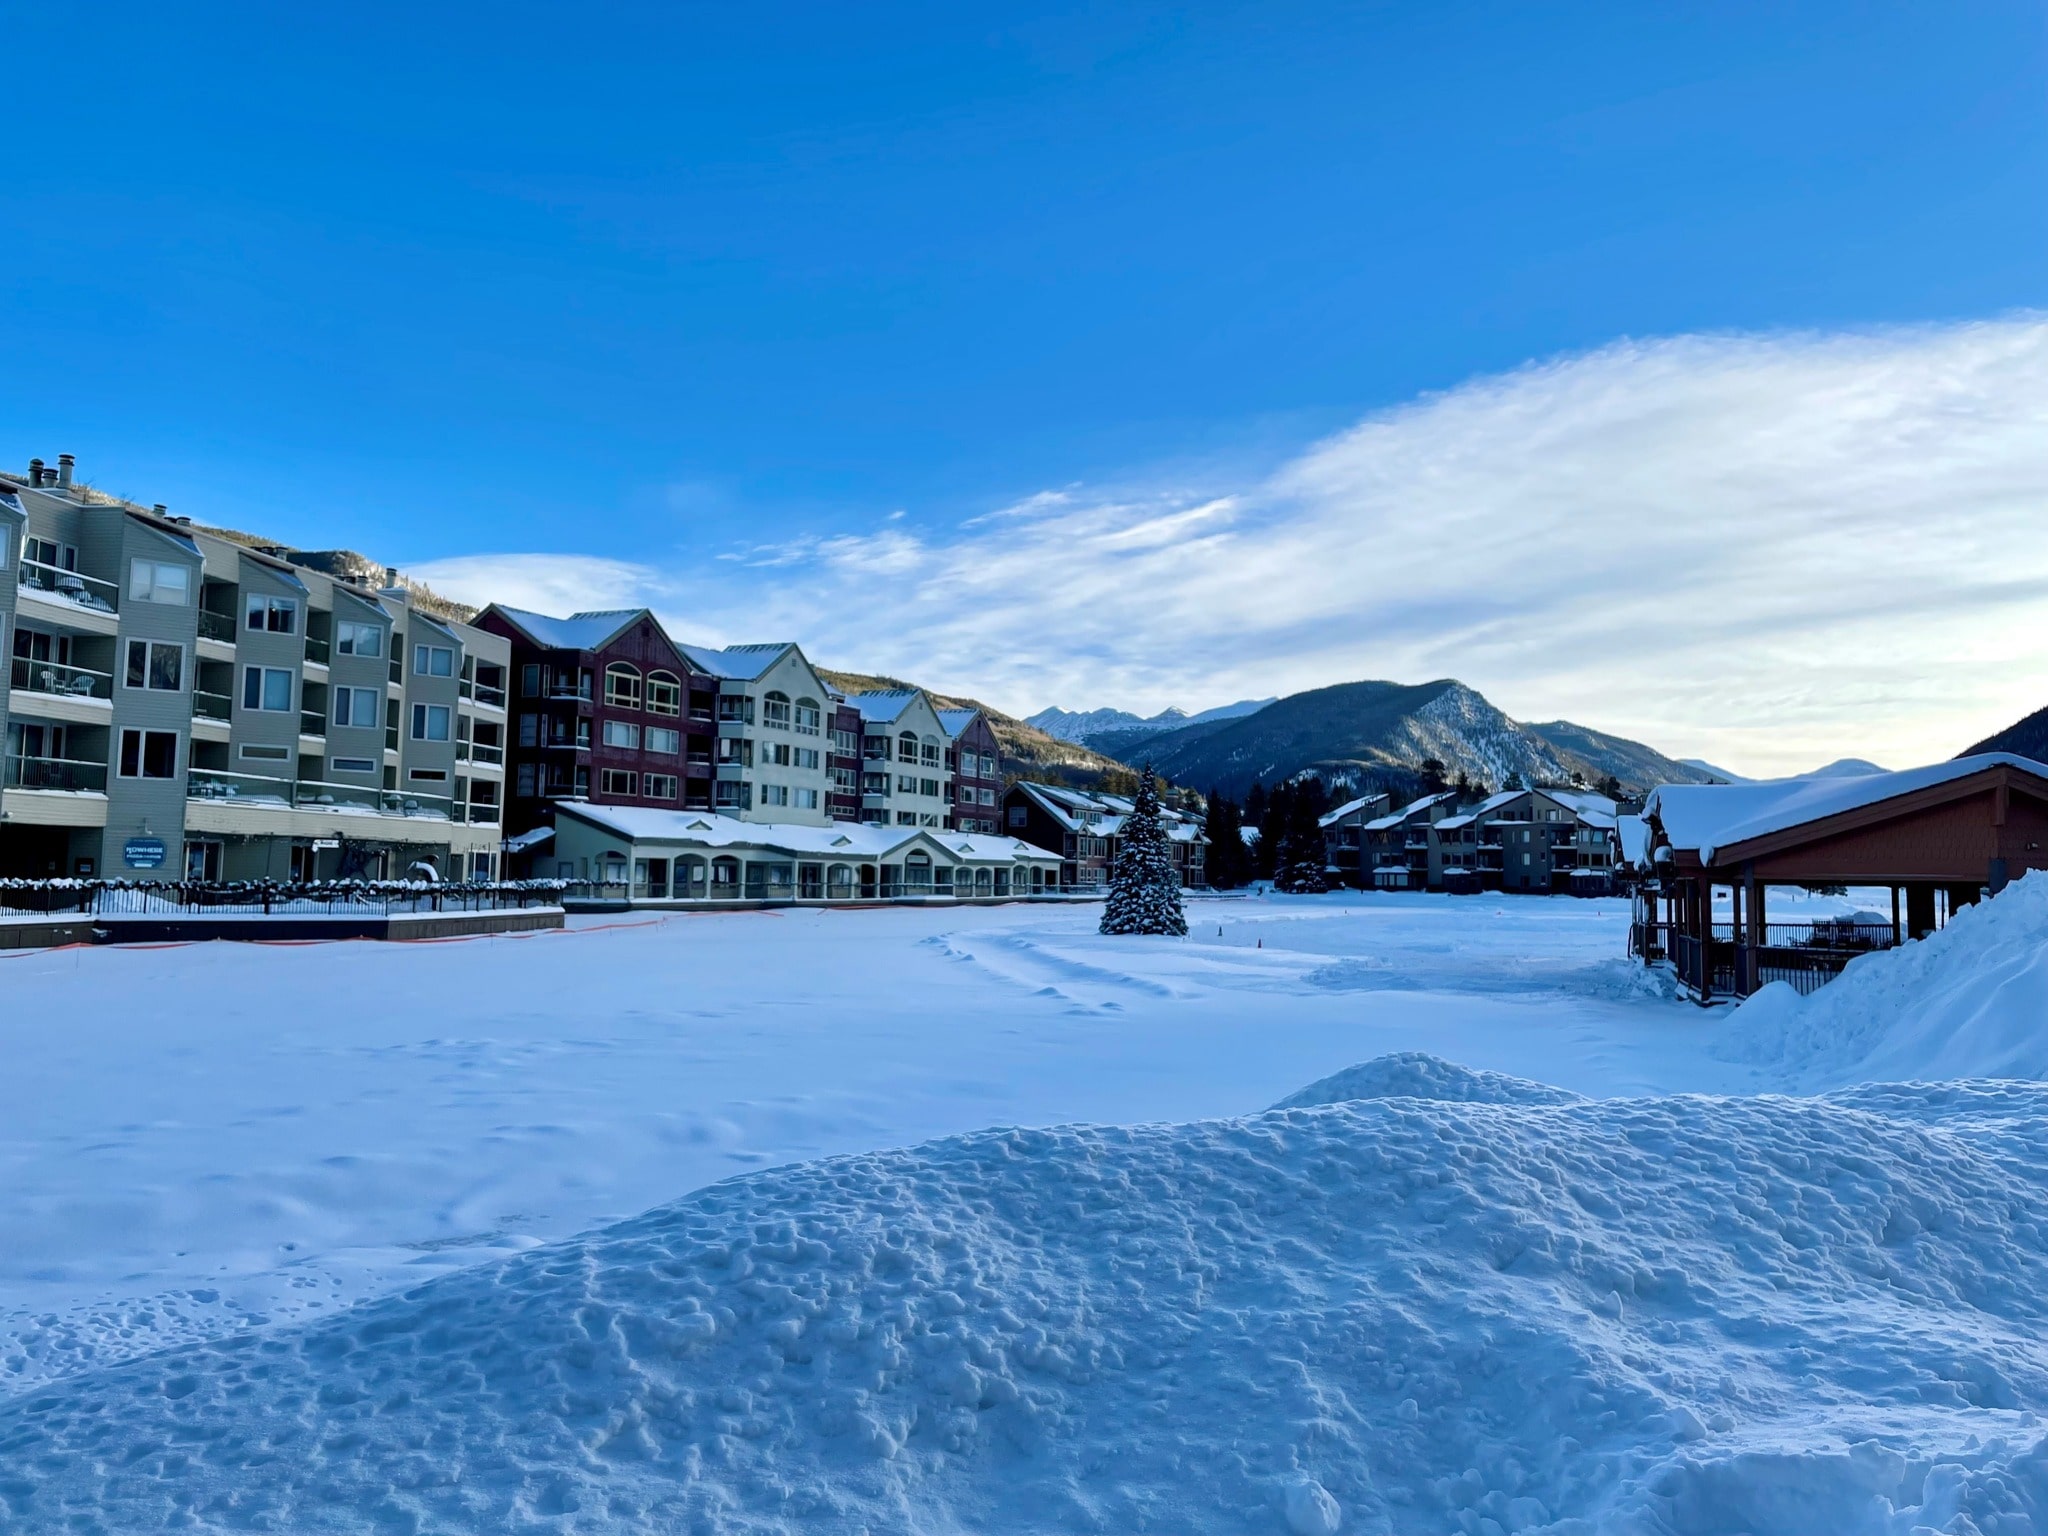 Keystone Resort becomes Vail Resorts' first ski area to open for